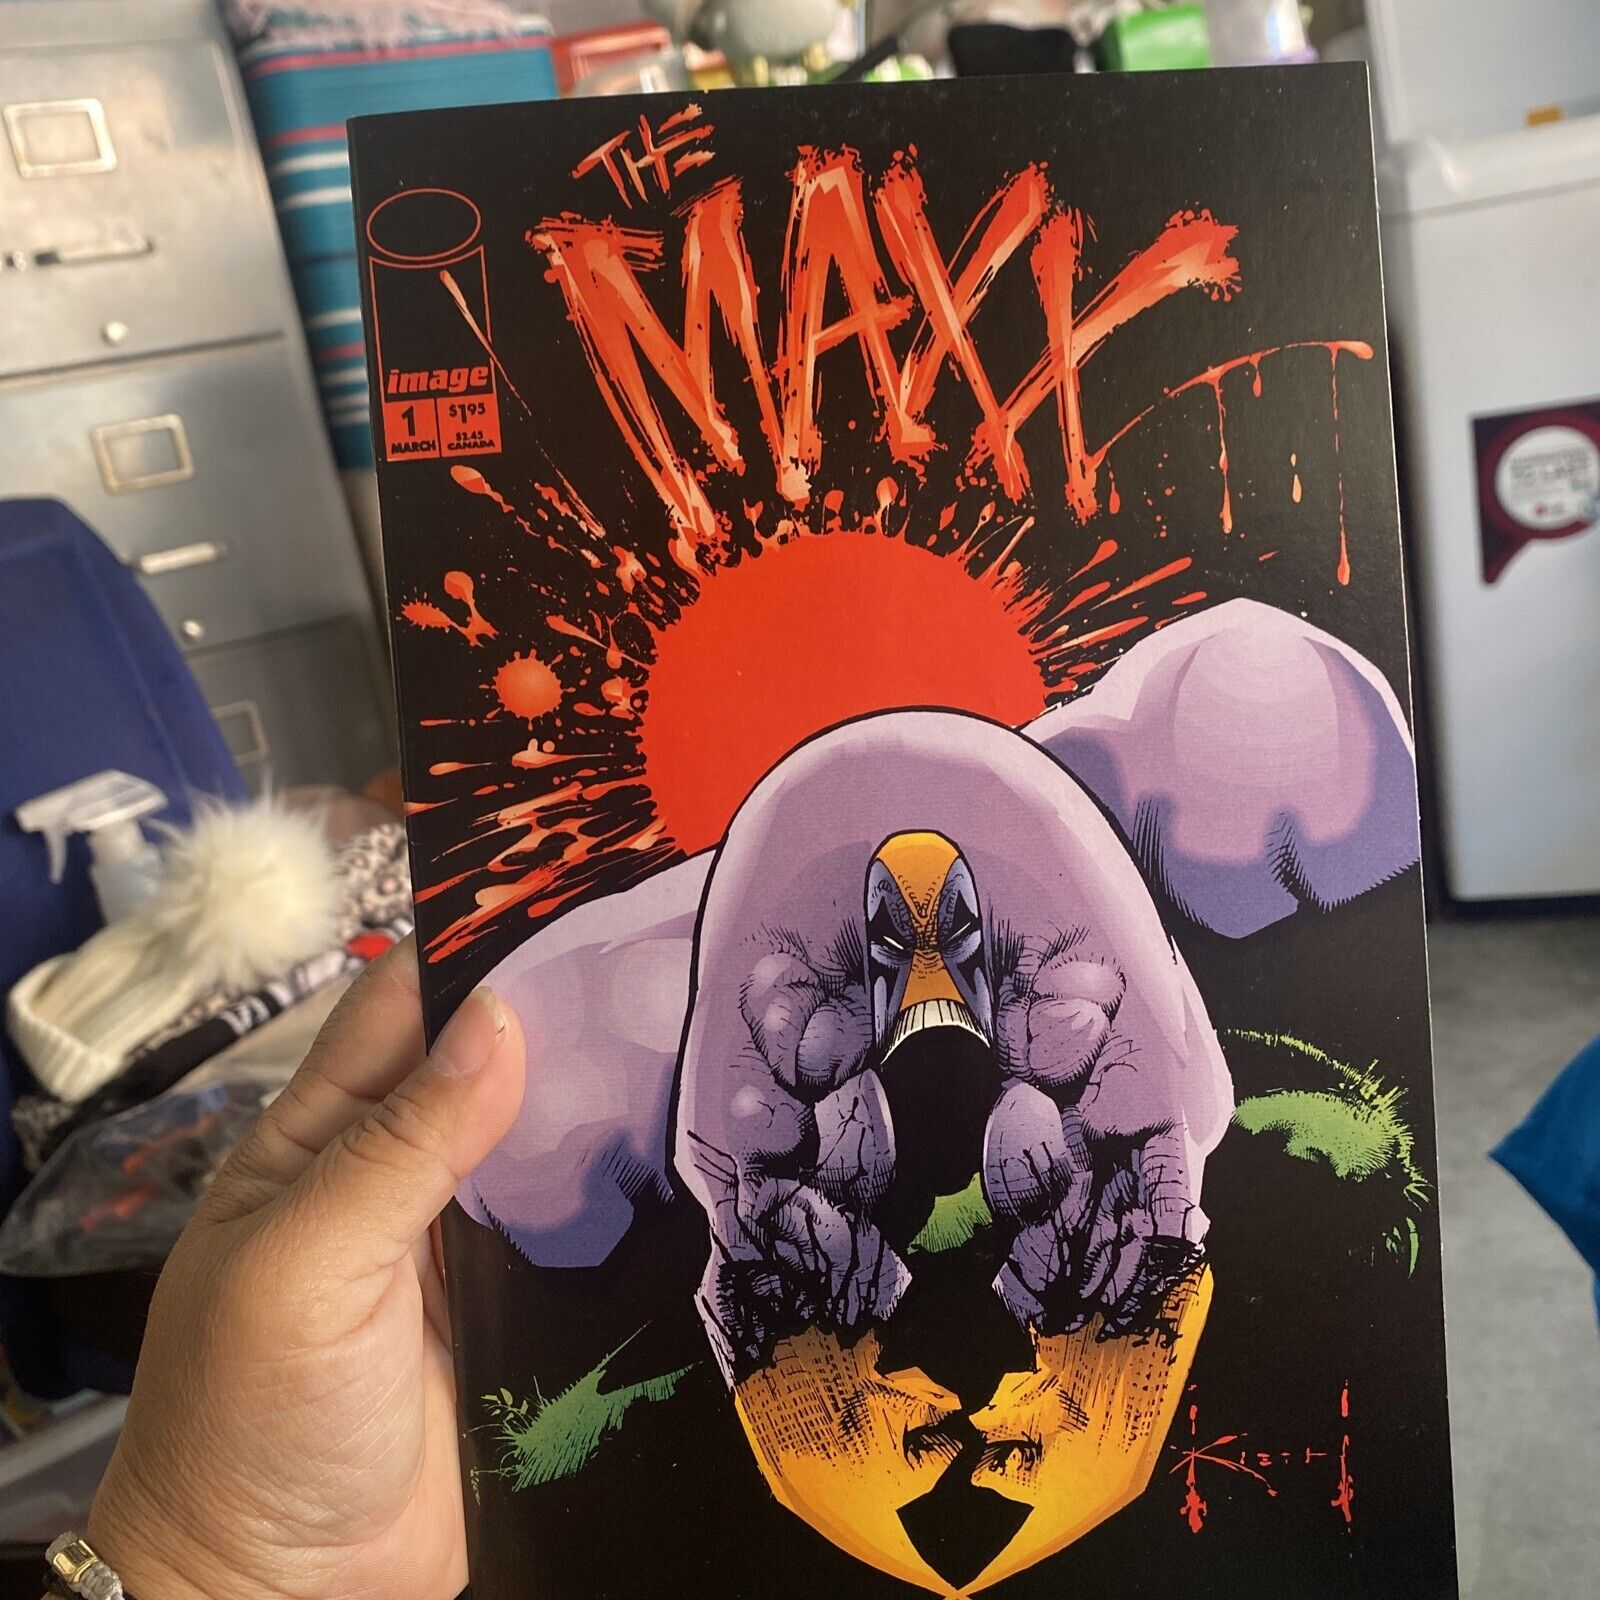 Image Comics - The Maxx - Issue 1 First Print